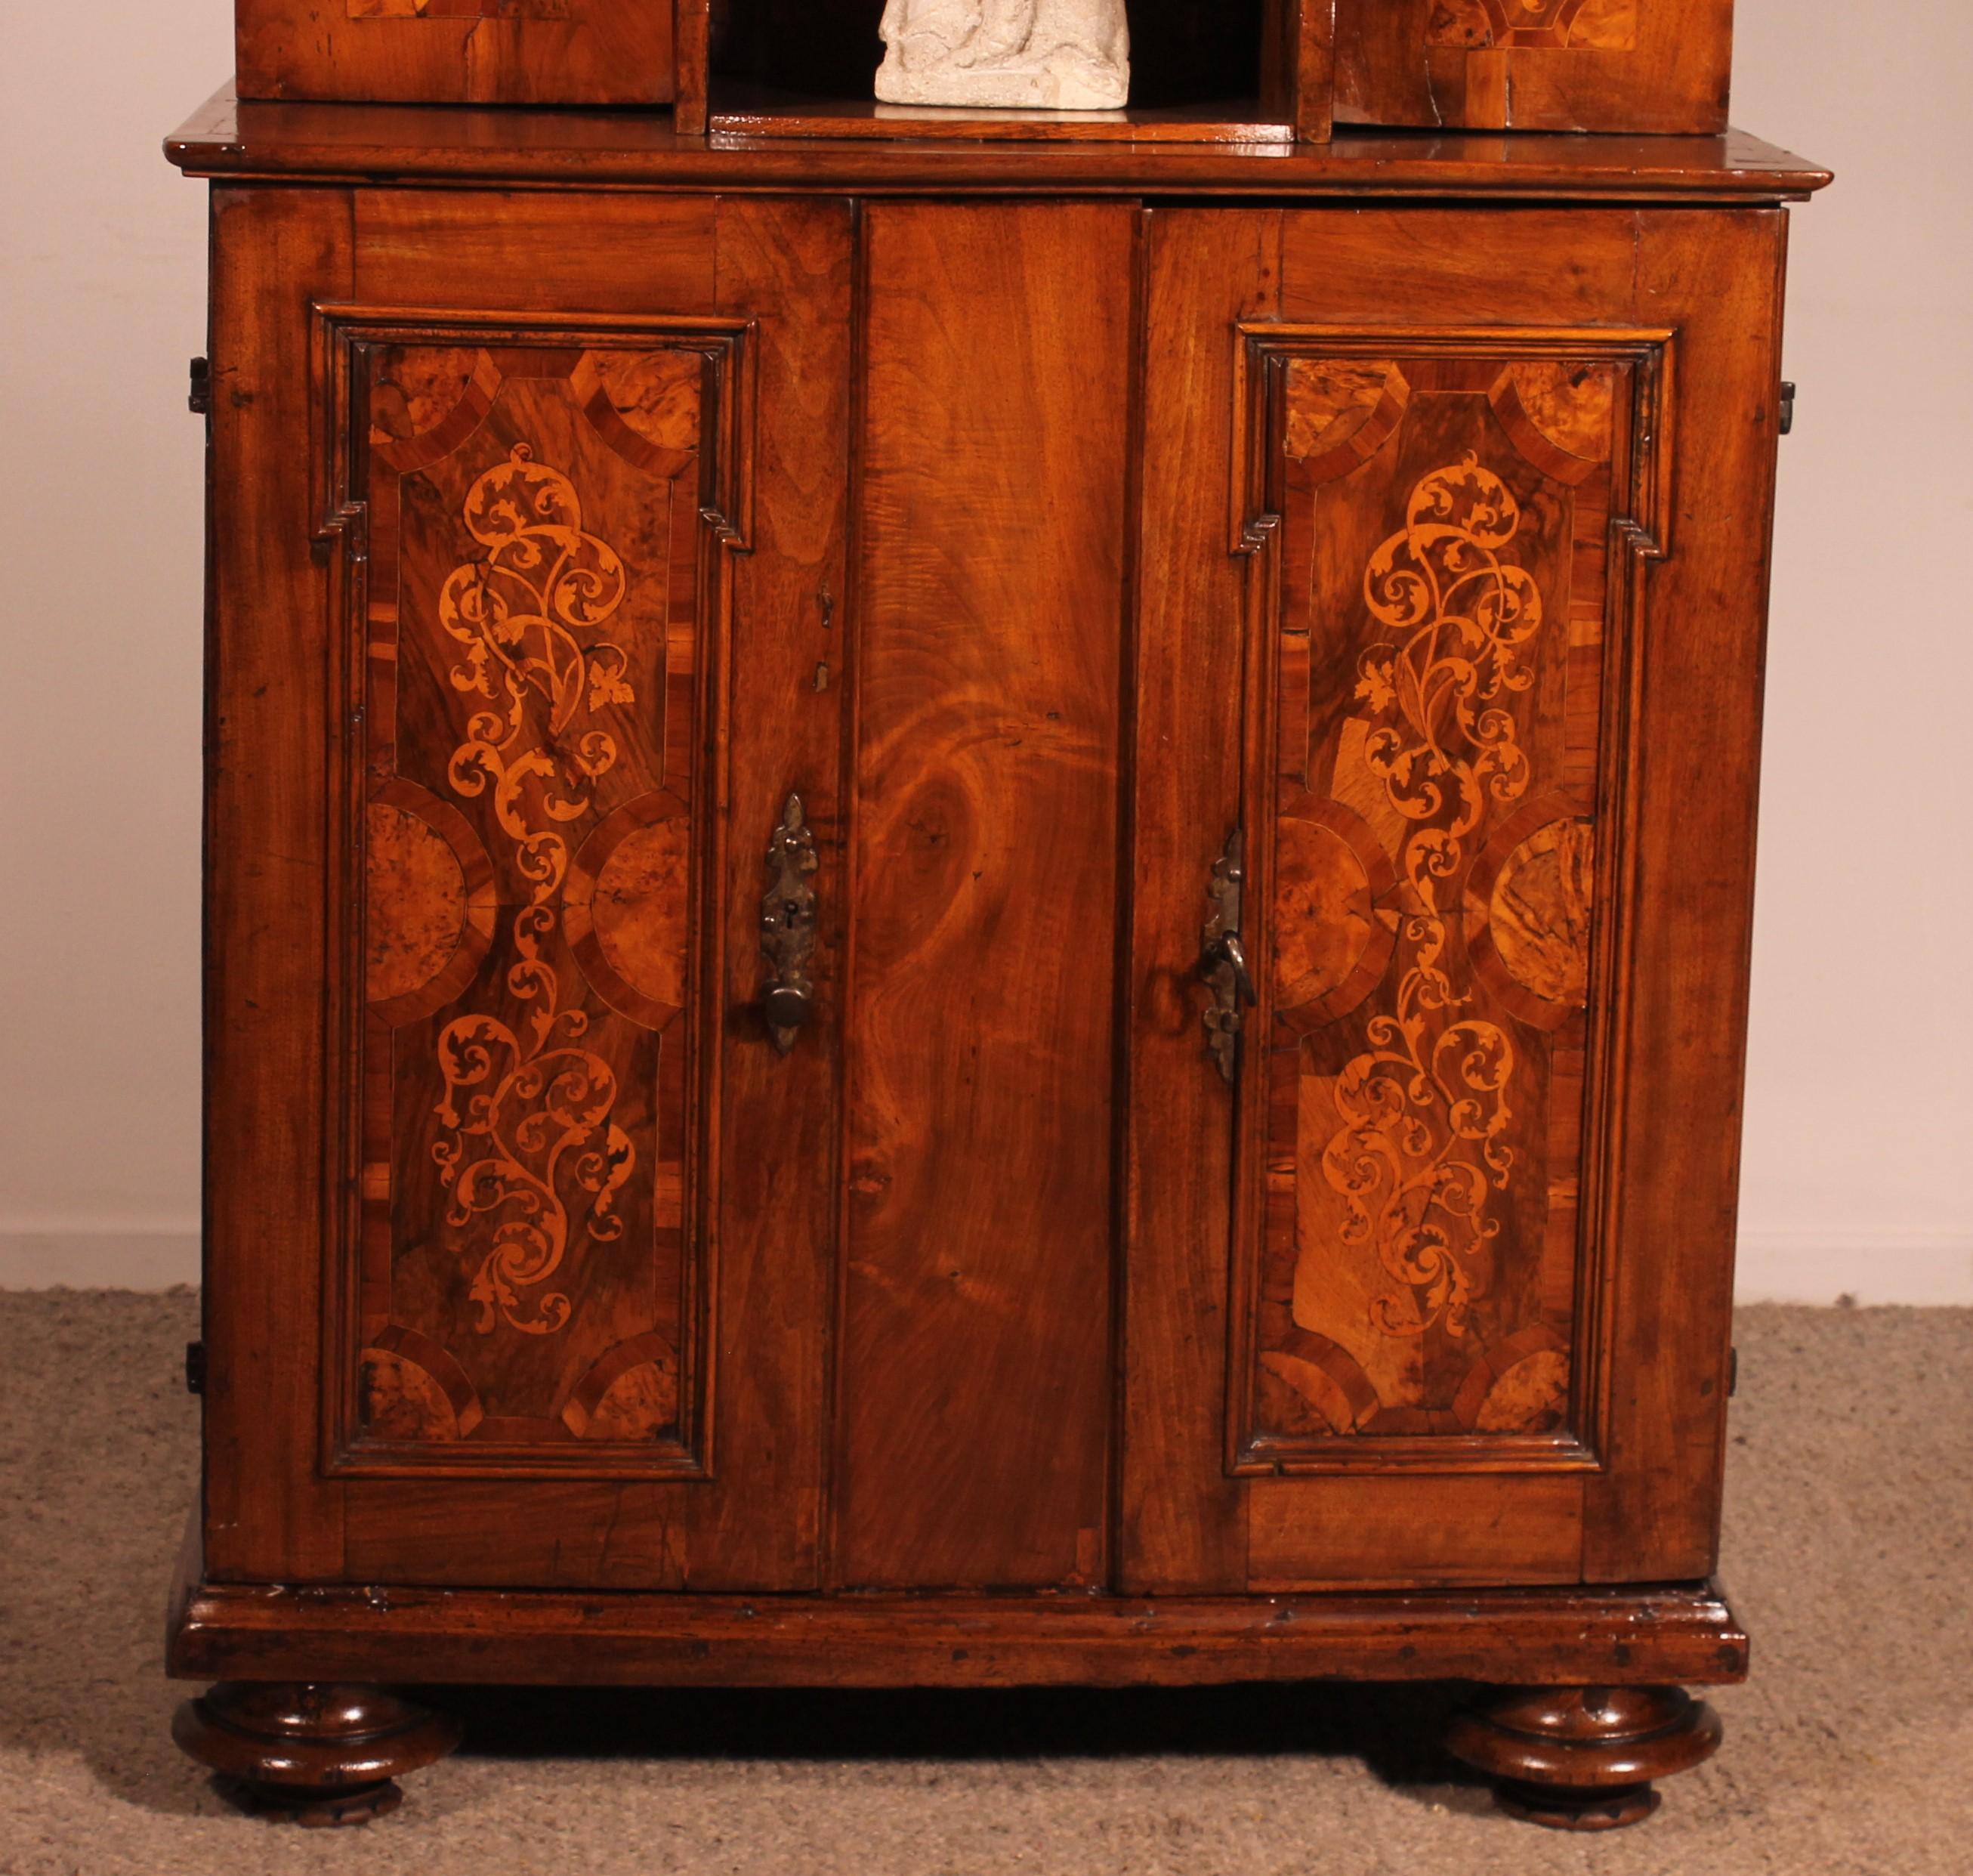 Superb small 6-door buffet in walnut from the 17th century dated 1639 from northern Italy

Very beautiful, unique piece of furniture with a small niche in its center. We have placed a stone sculpture of a virgin that we can sell with the buffet if